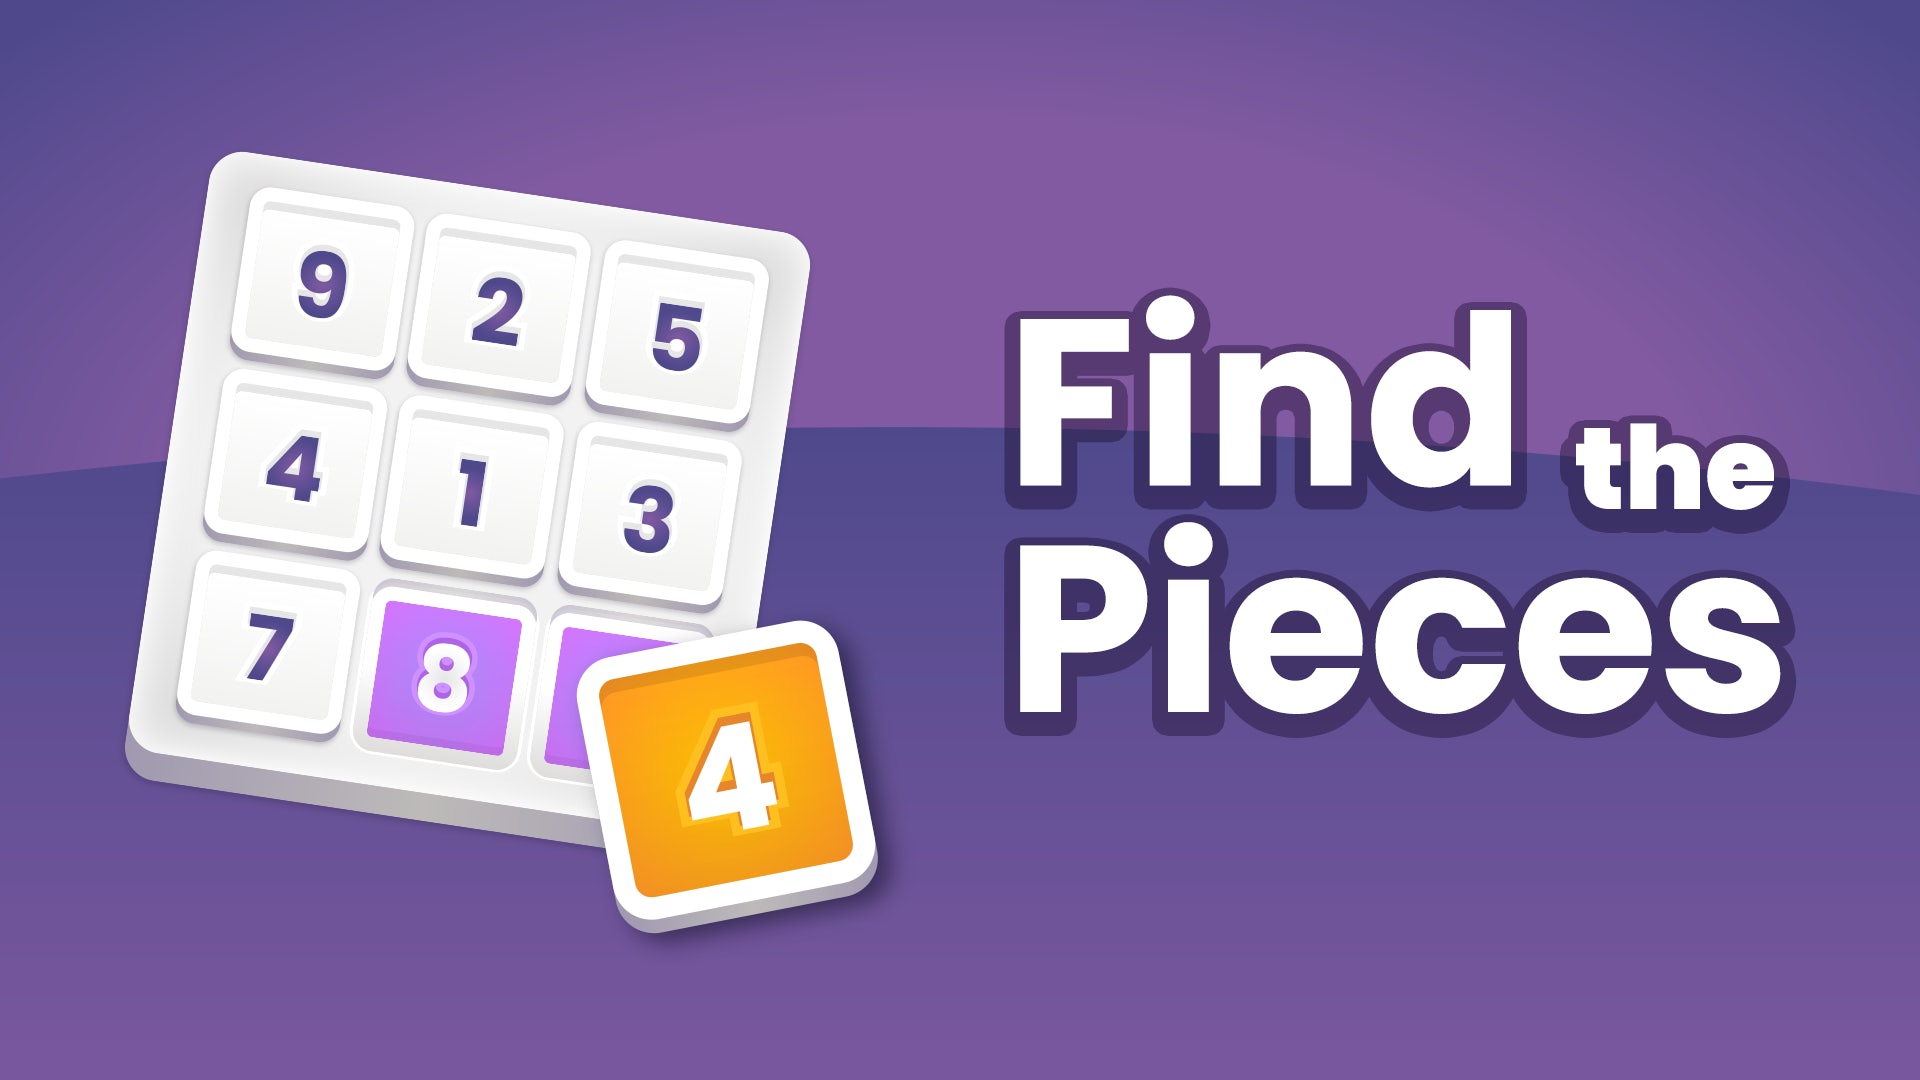 Find the Pieces